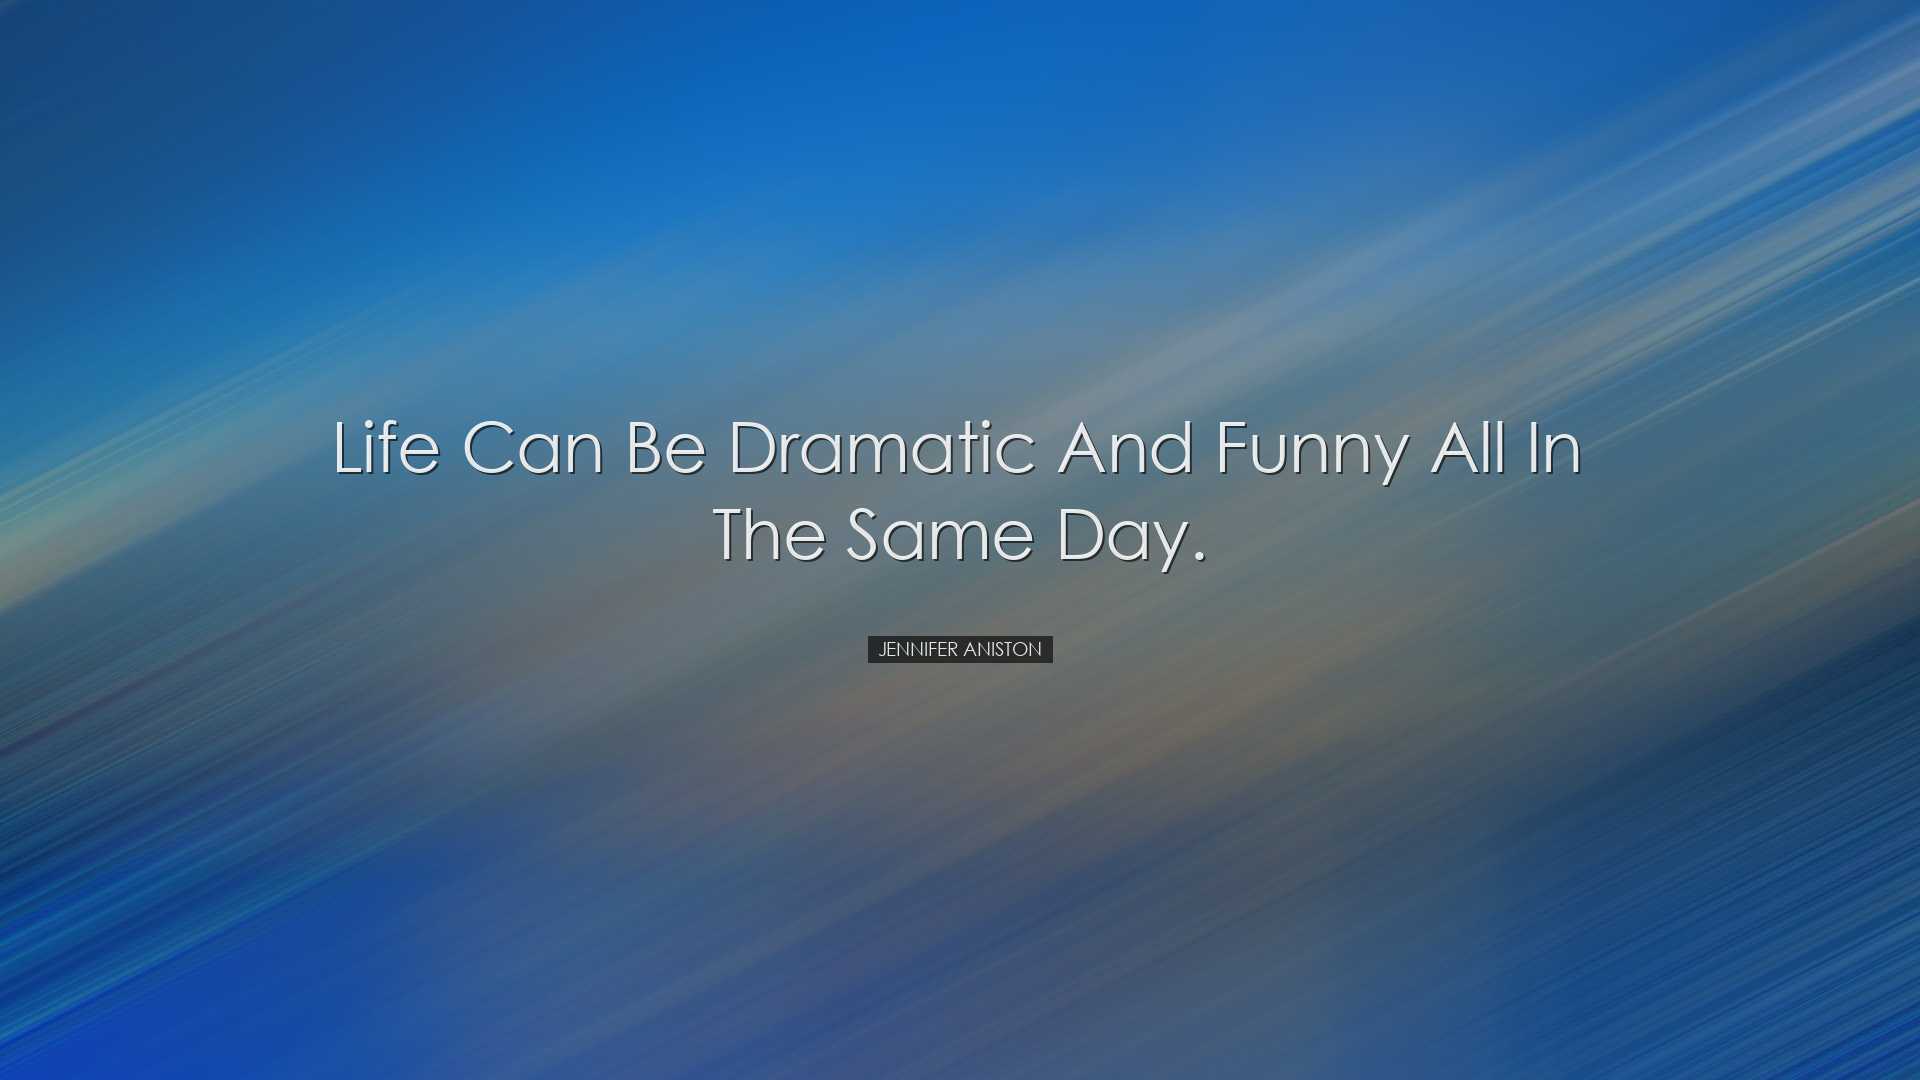 Life can be dramatic and funny all in the same day. - Jennifer Ani